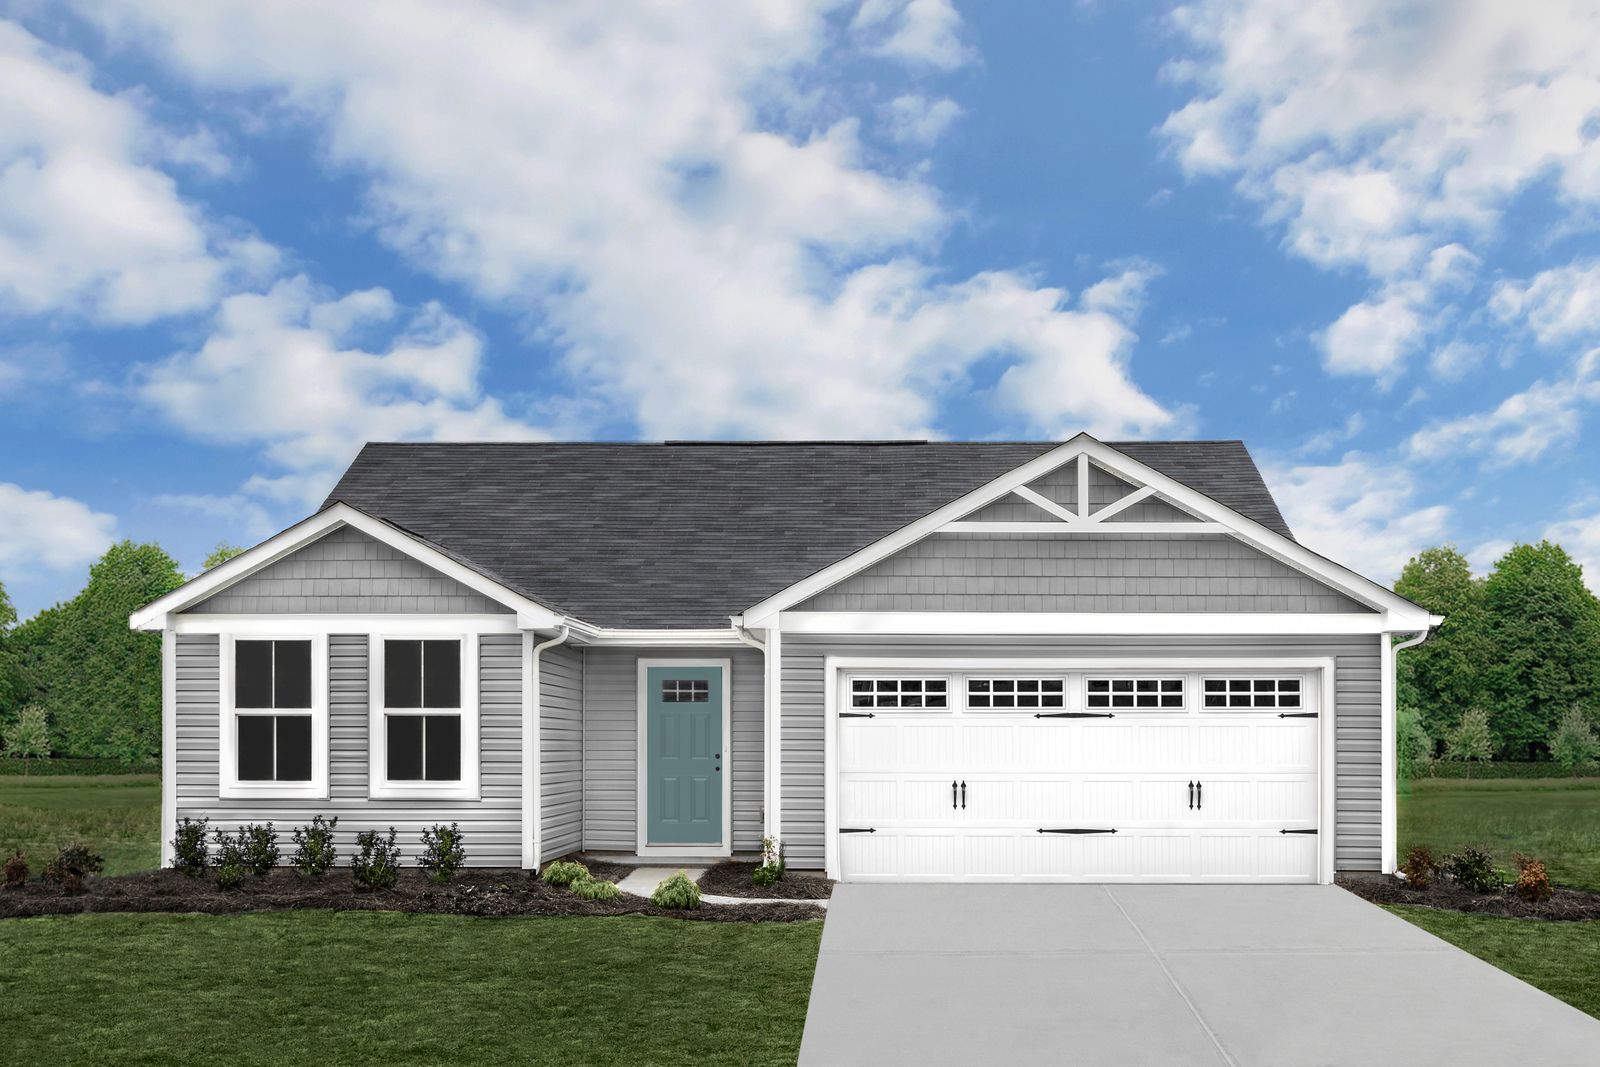 Own a new home in Seneca just 10 minutes to Clemson!